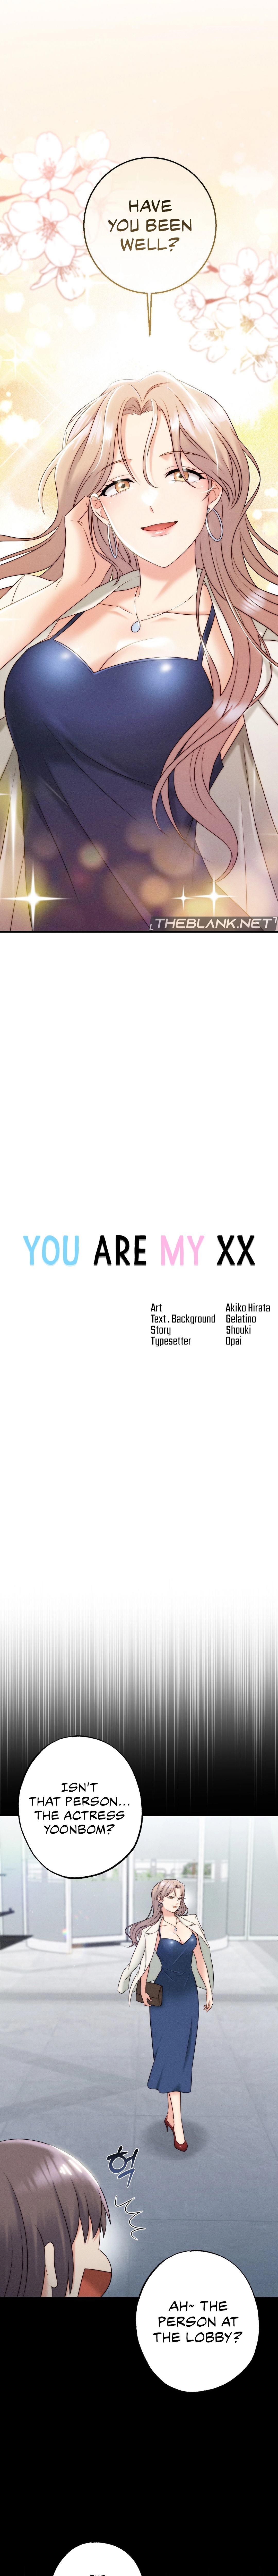 You are my XX NEW image